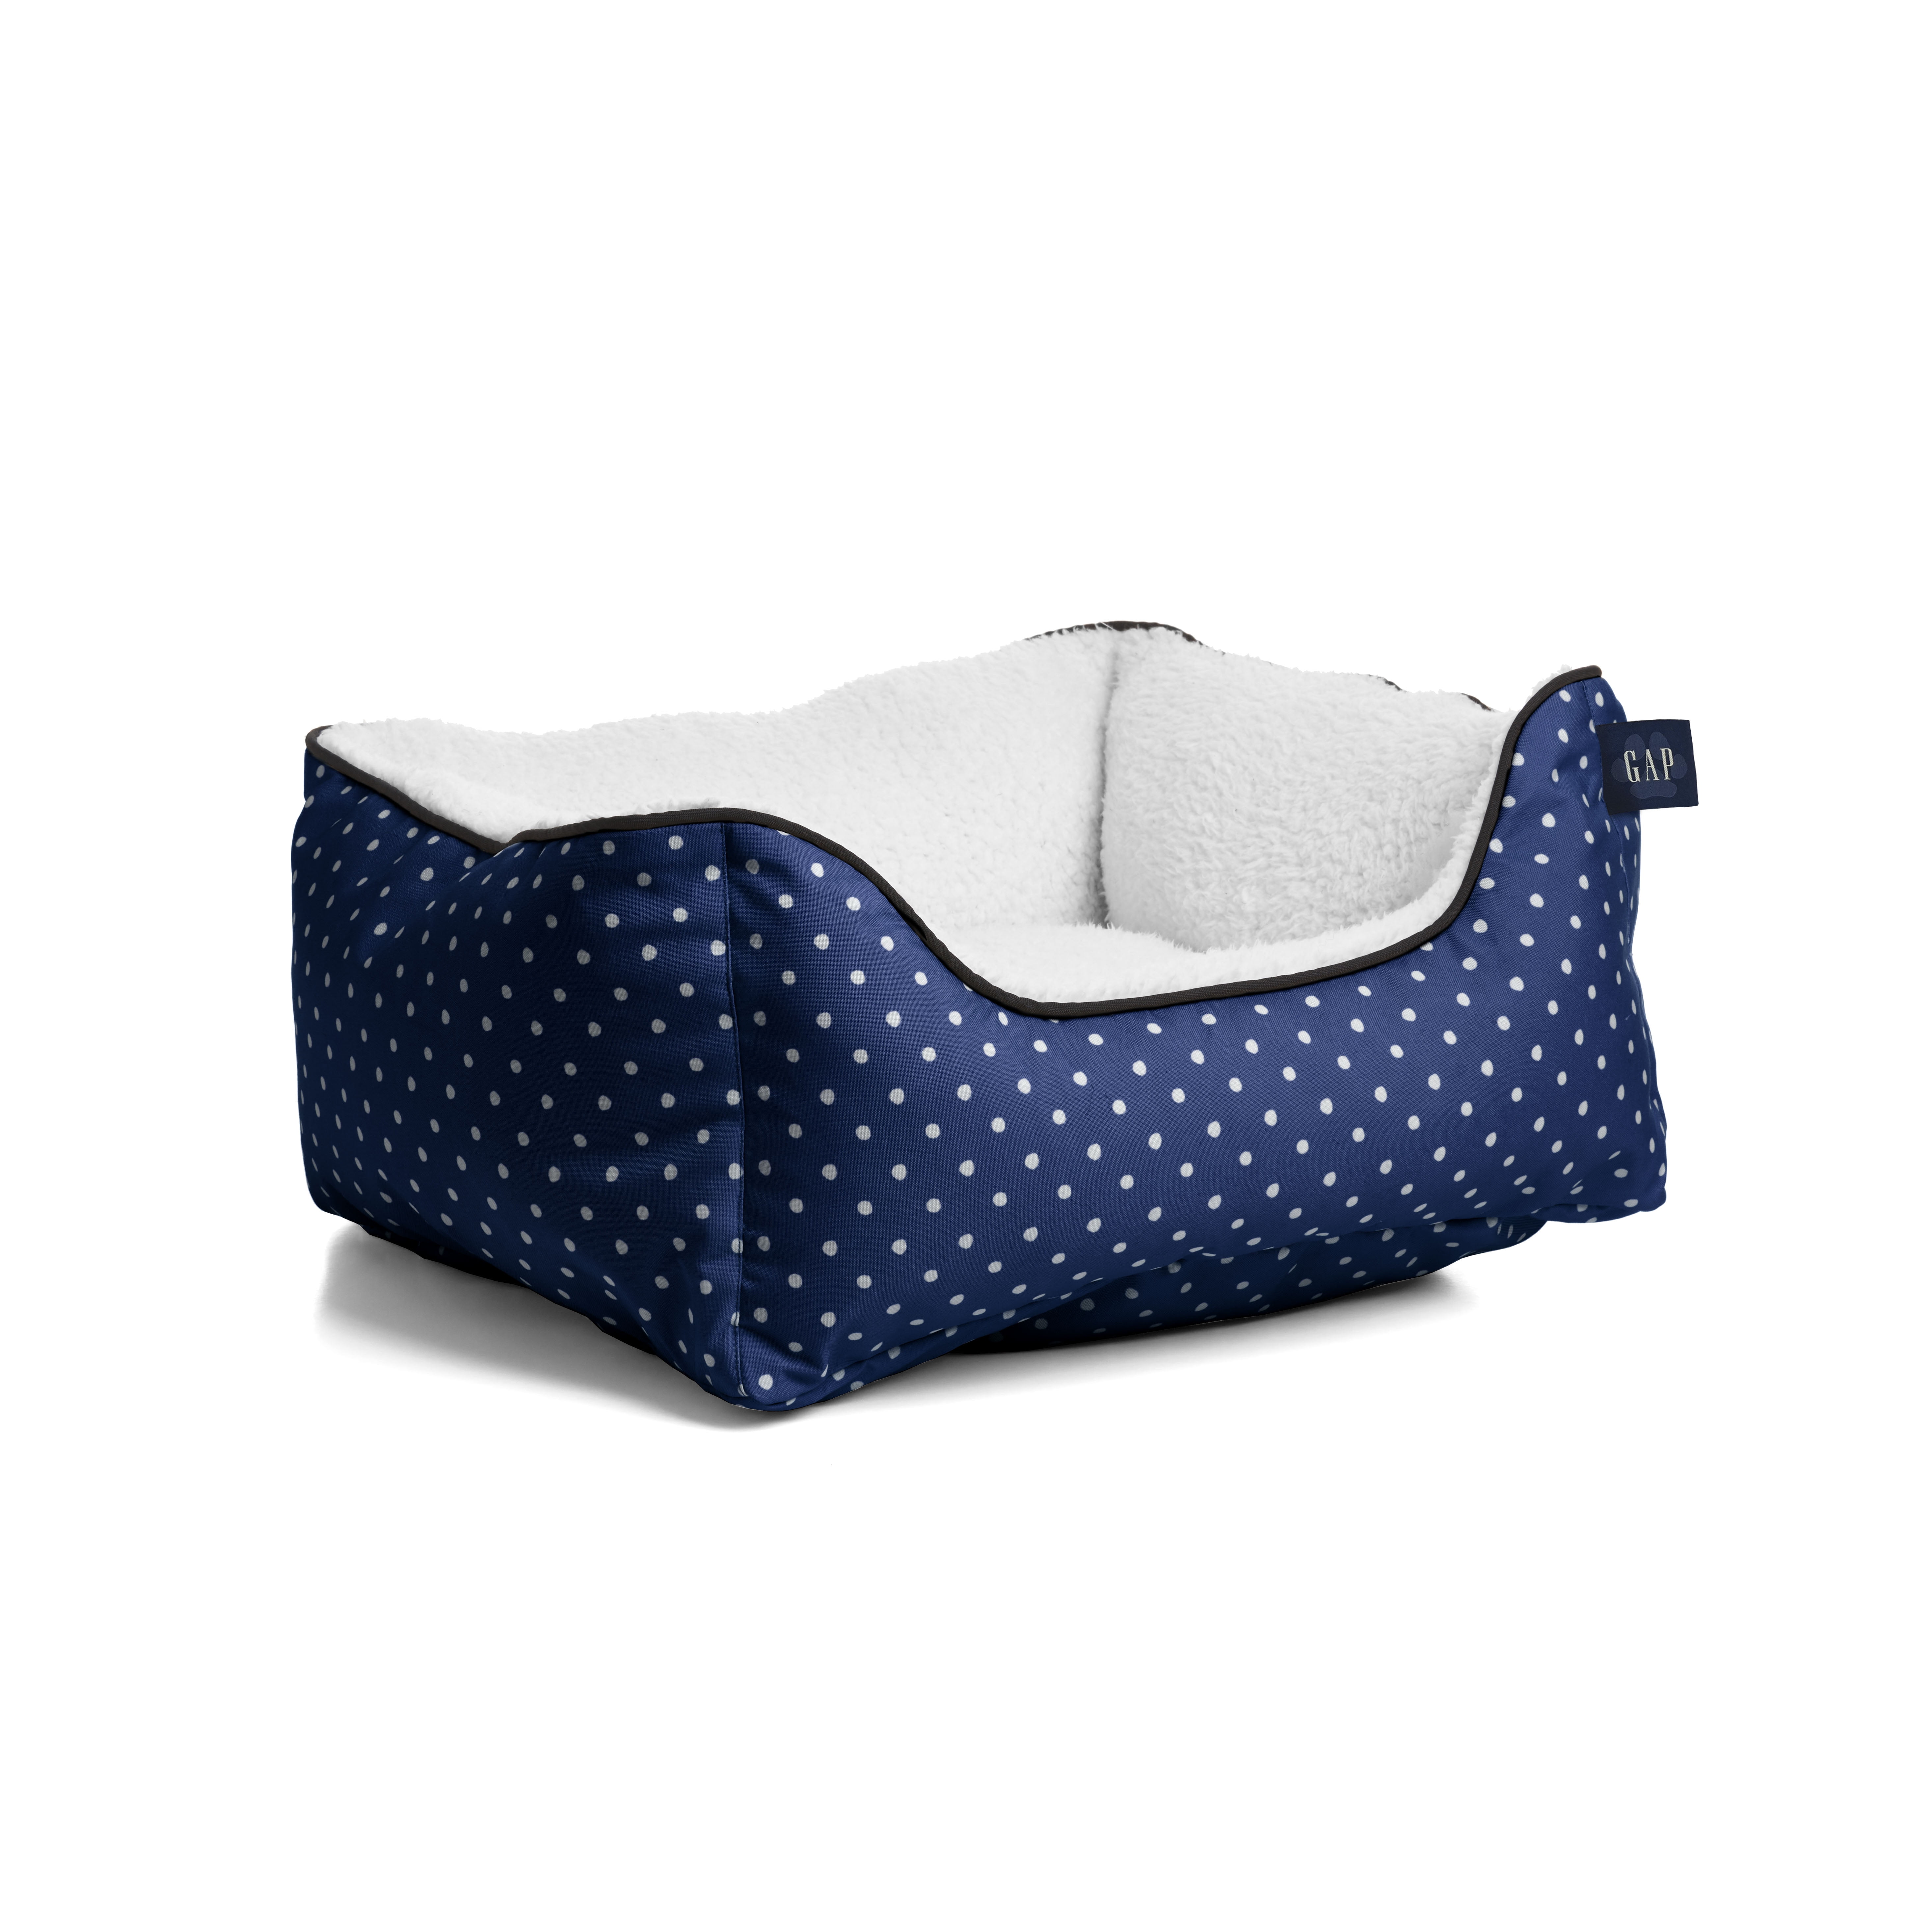 Gap Painted Dot Cuddler Pet Bed, Recycled Polyester Cover with Sherpa inner, Small 20"x18", Navy